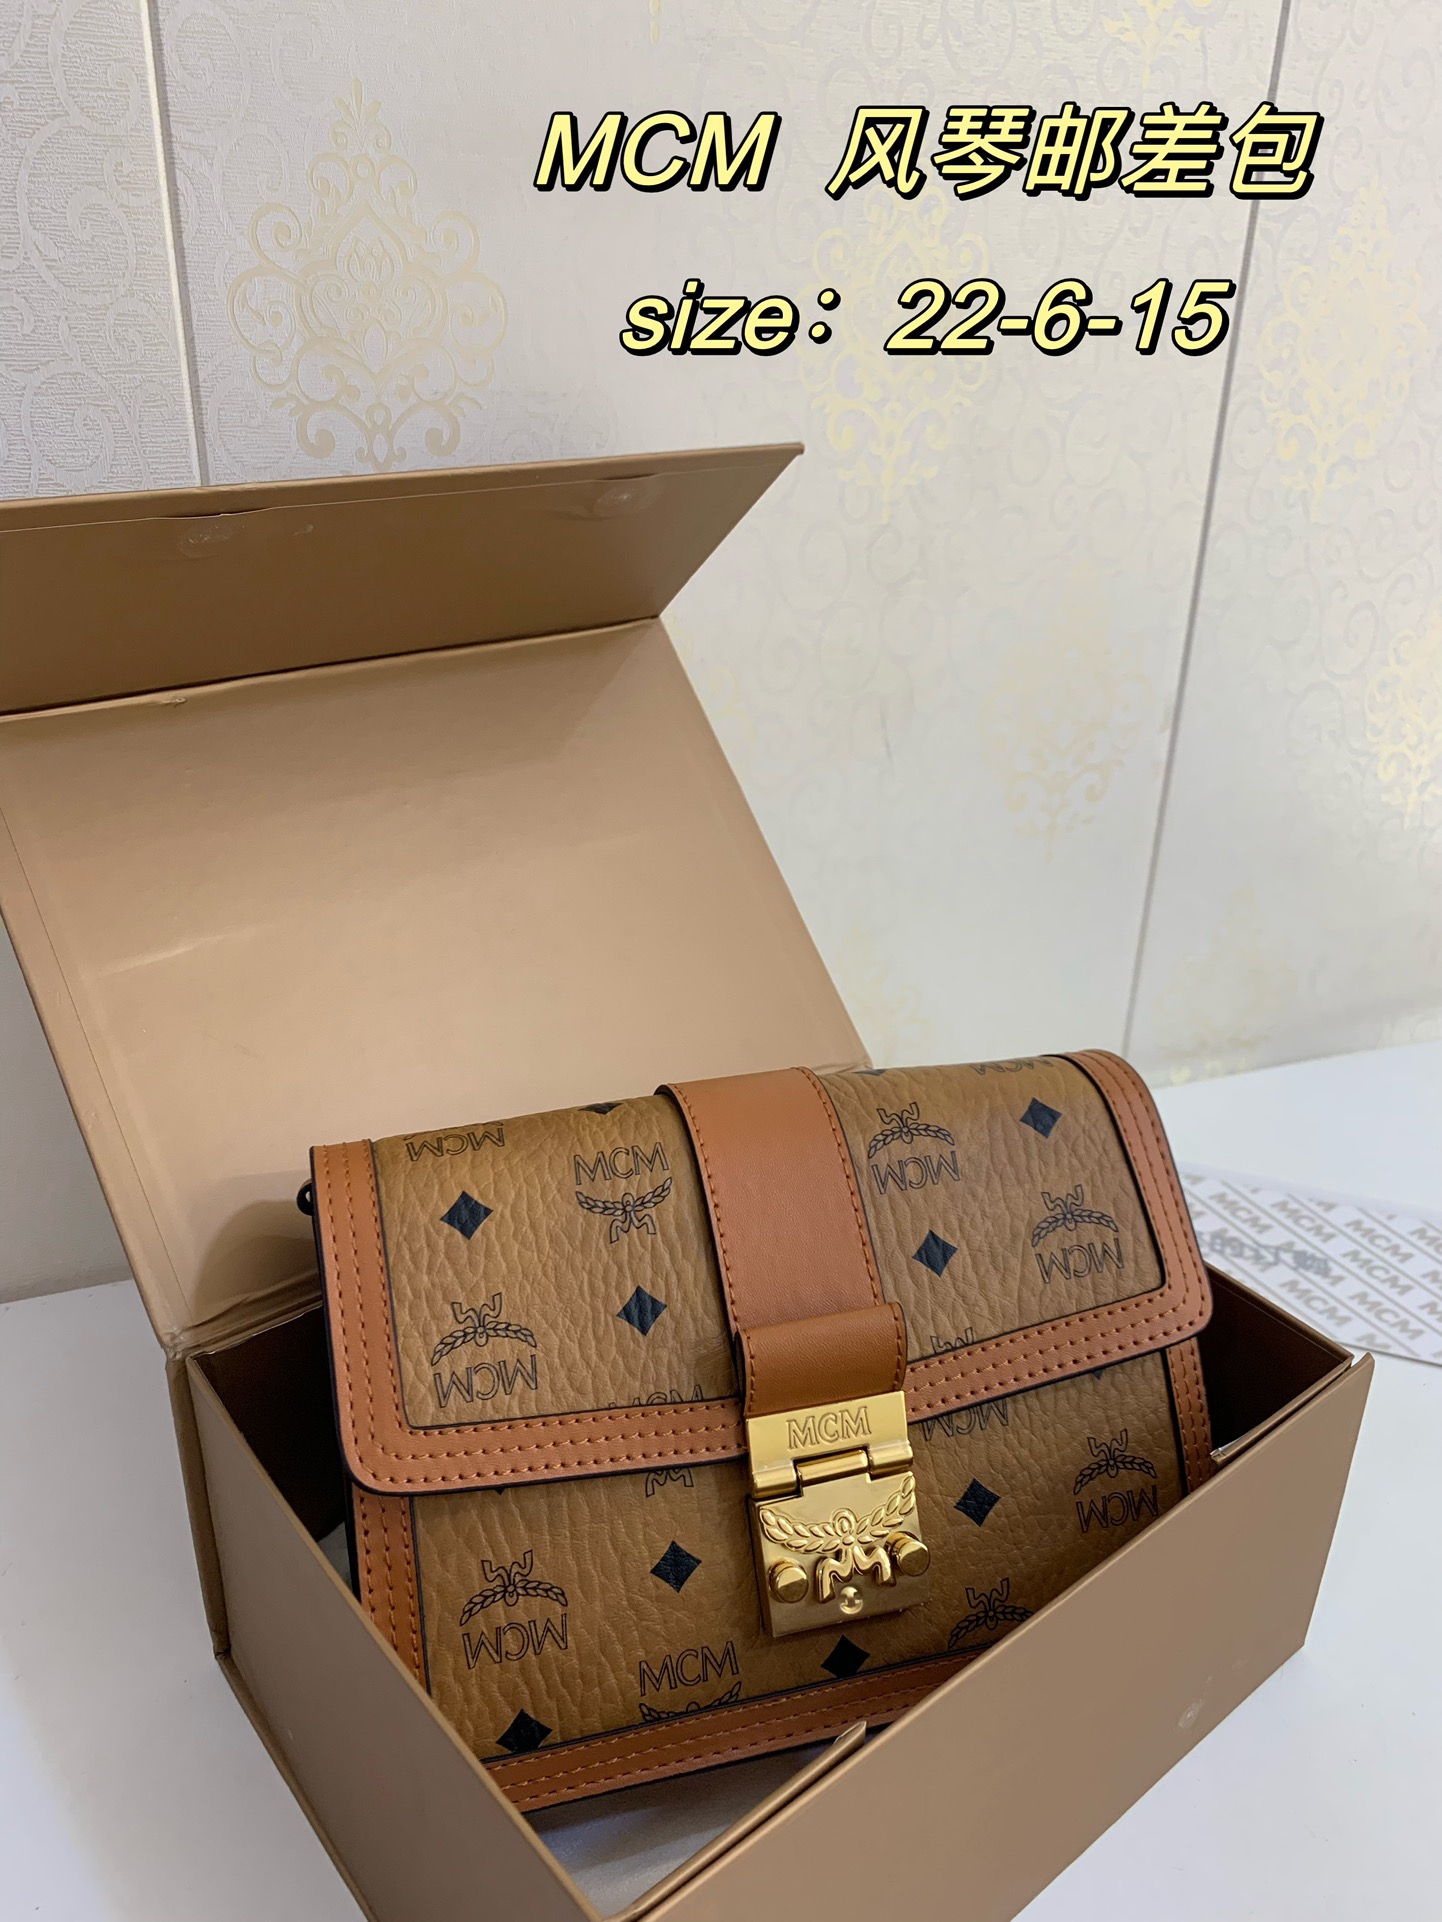 Small size ❤️ Comes with a folding gift box. MCM's new Patricia organ-style messenger bag combines c